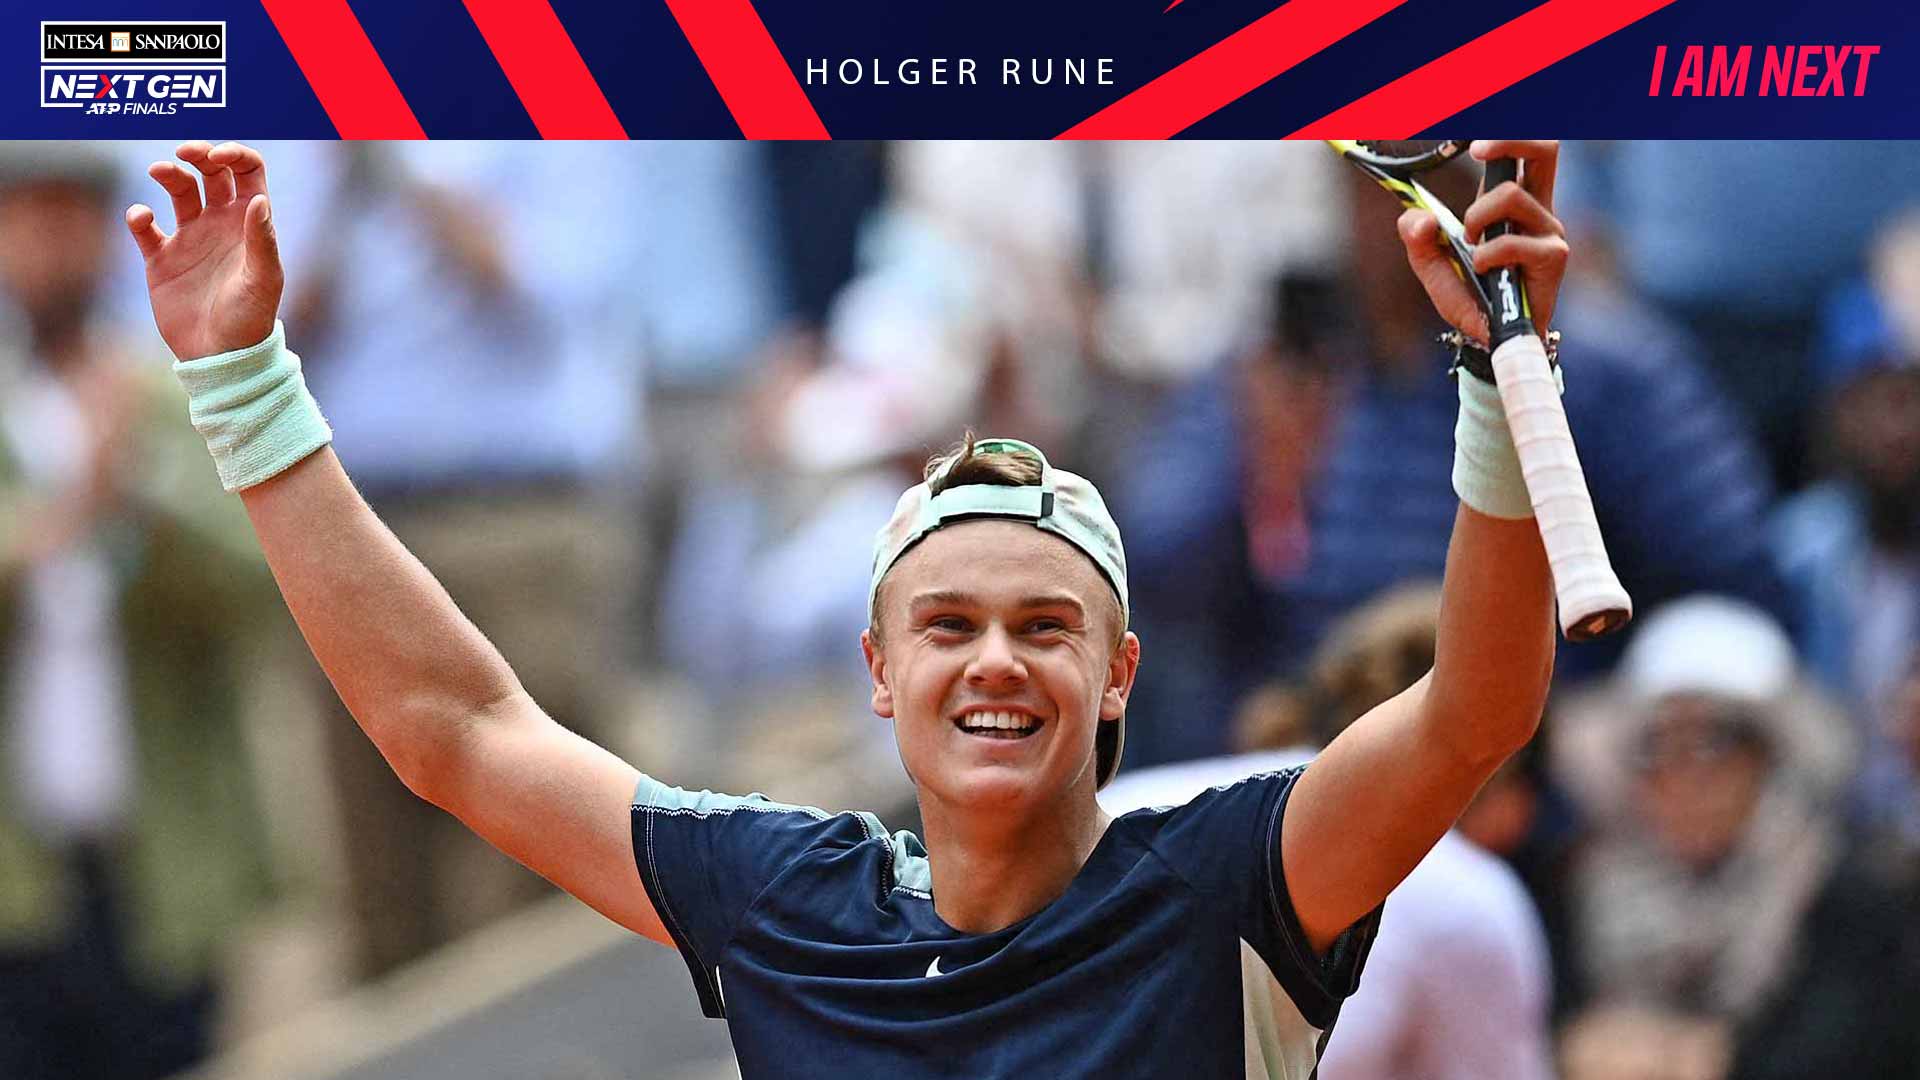 Holger Rune celebrates defeating Stefanos Tsitsipas in May to reach his maiden Grand Slam quarter-final at Roland Garros.